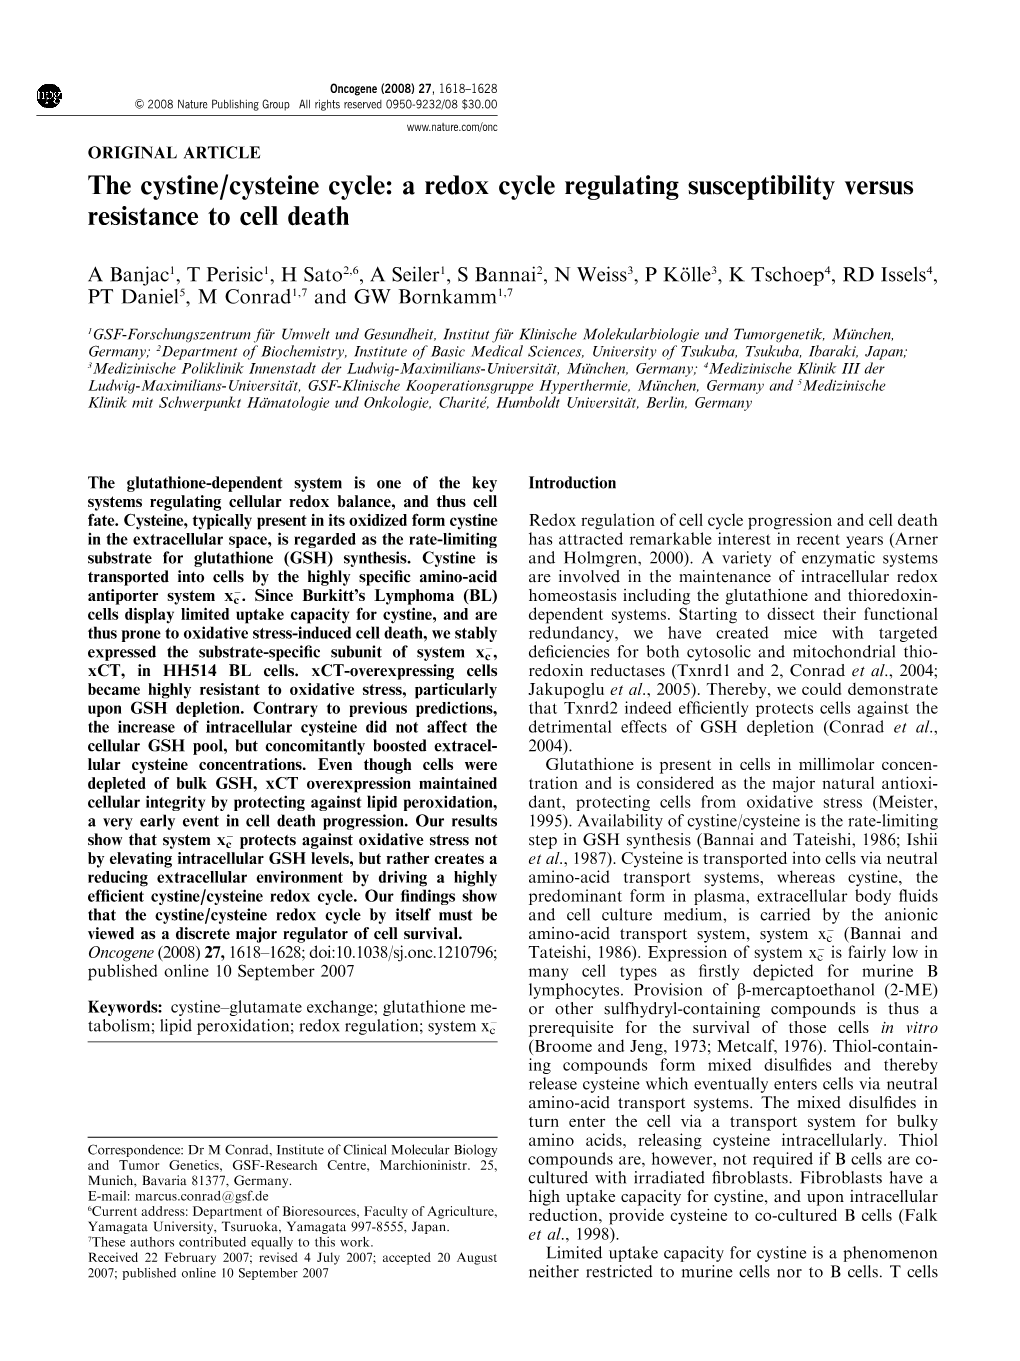 The Cystine/Cysteine Cycle: a Redox Cycle Regulating Susceptibility Versus Resistance to Cell Death